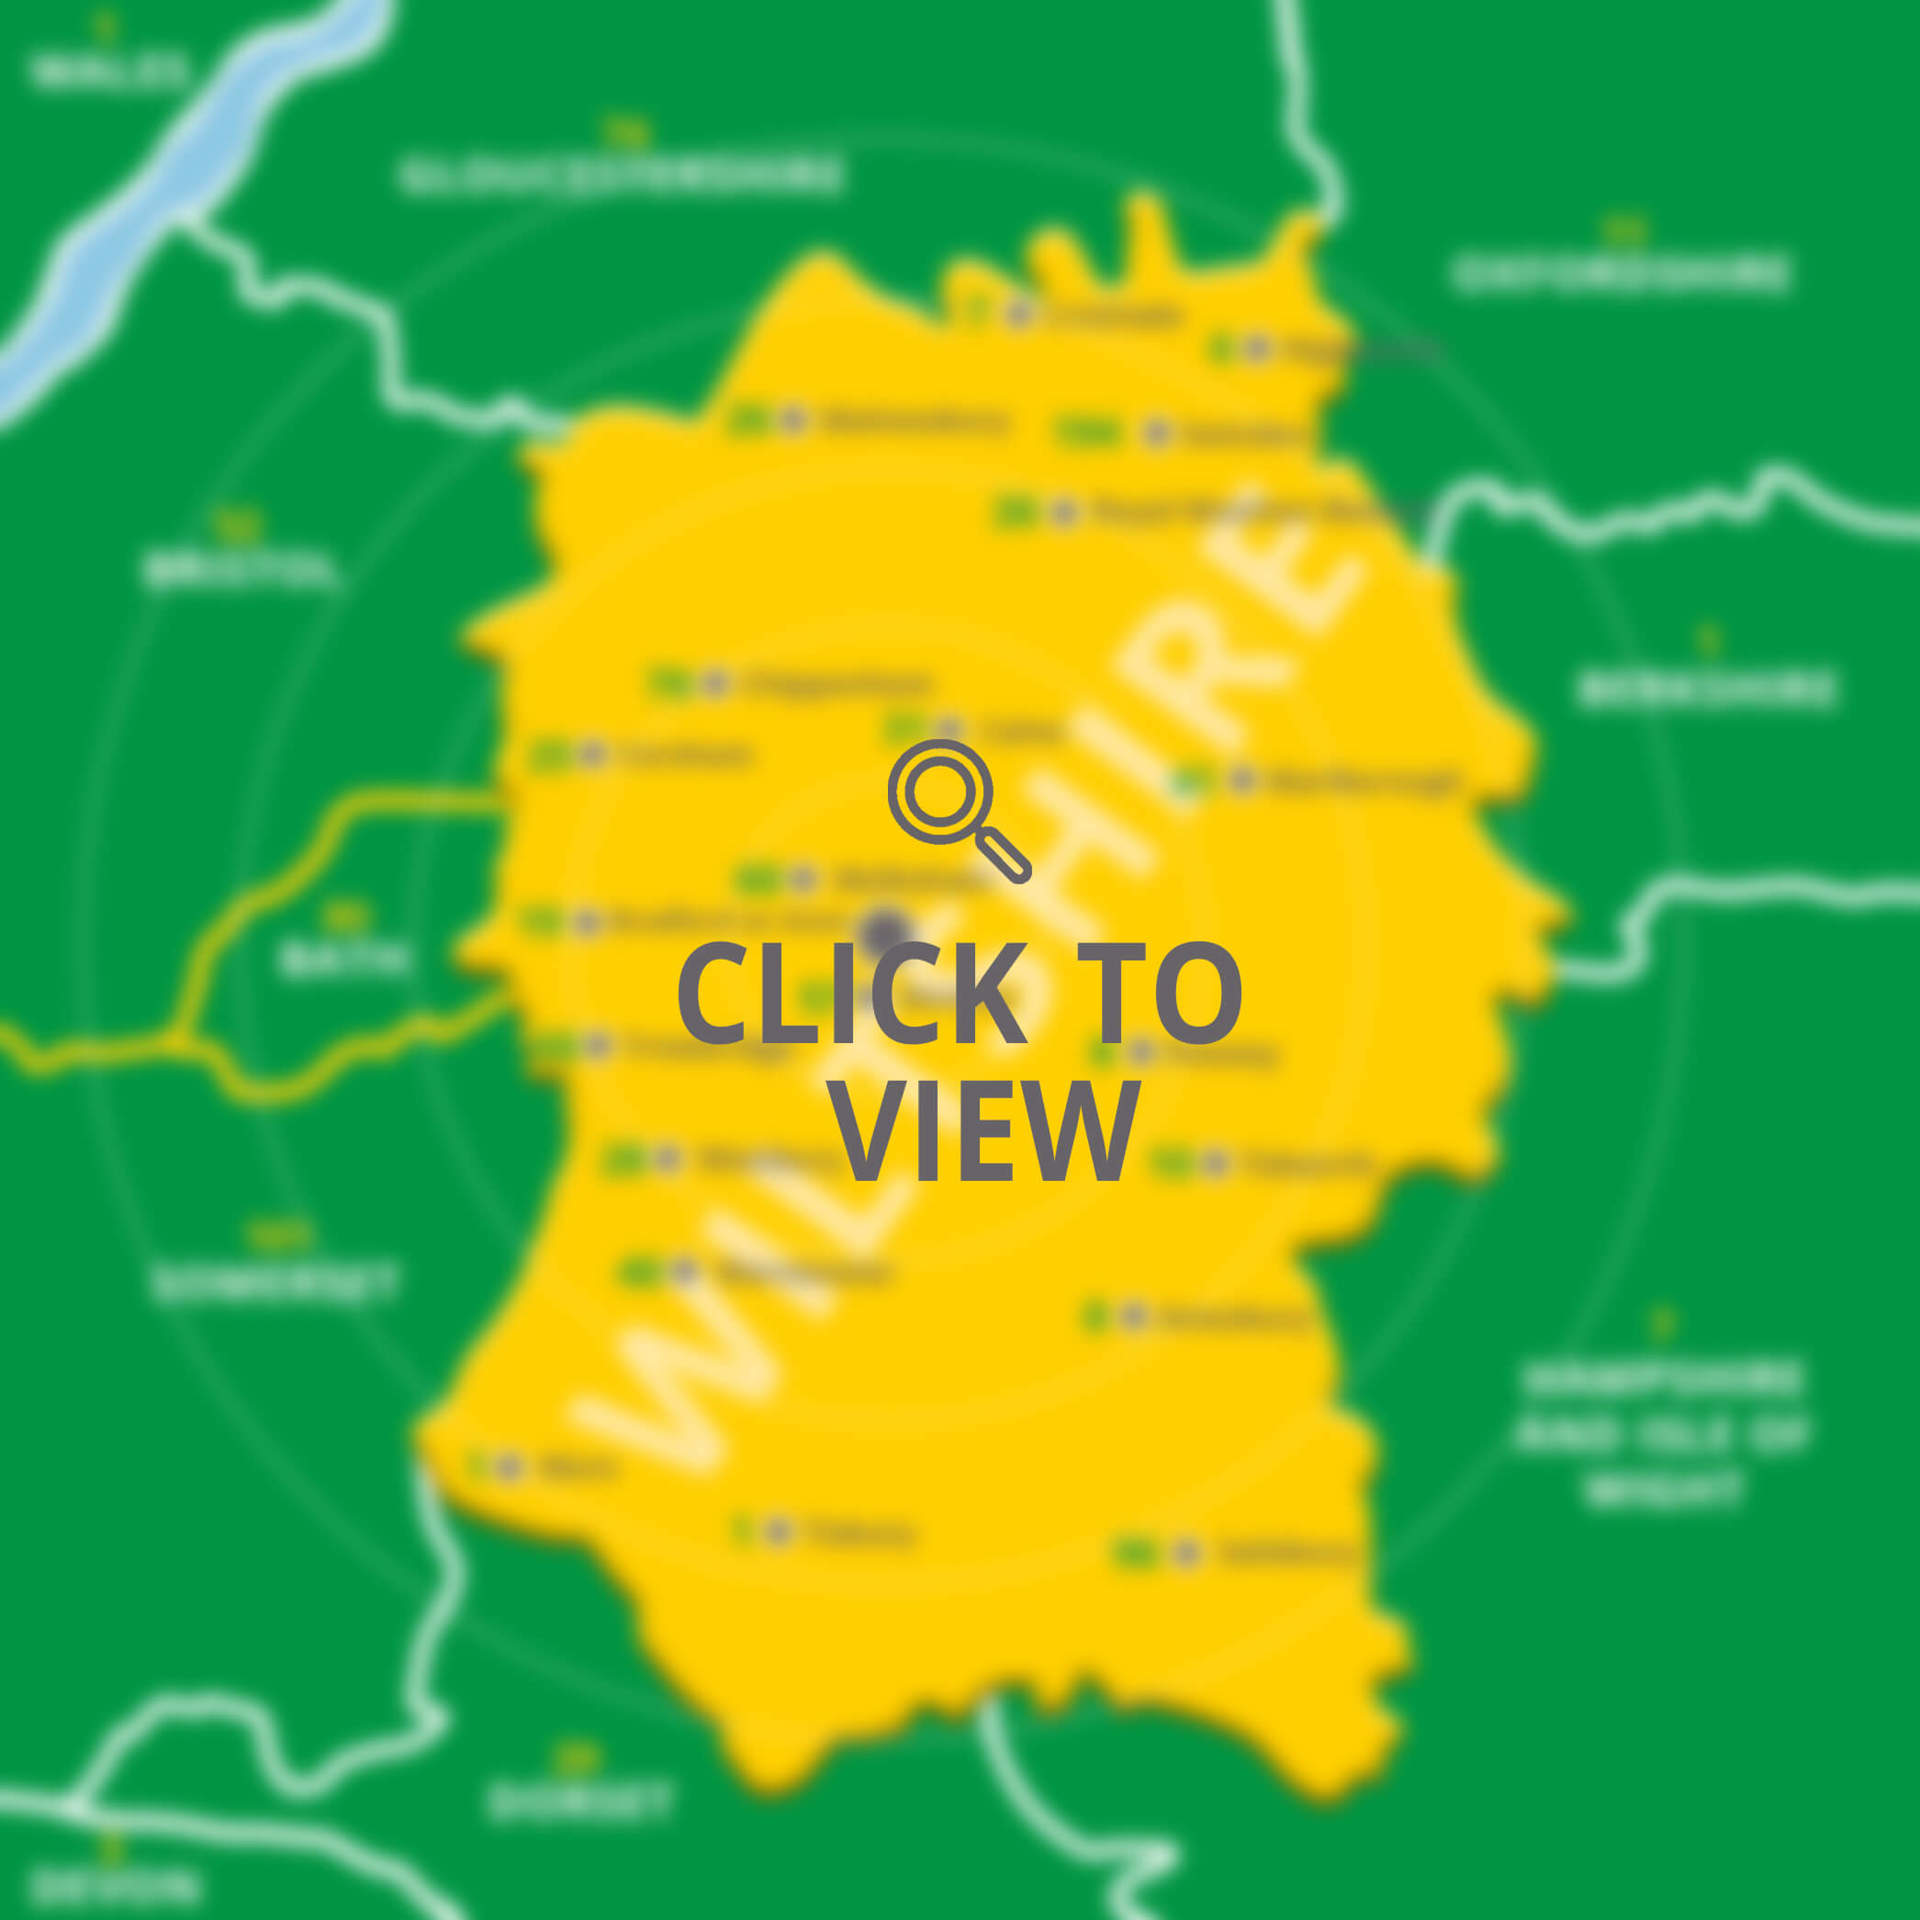 A graphic illustrating a blurred yellow map of Wiltshire with a grey magnifying glass and 'click to view' text overlay.